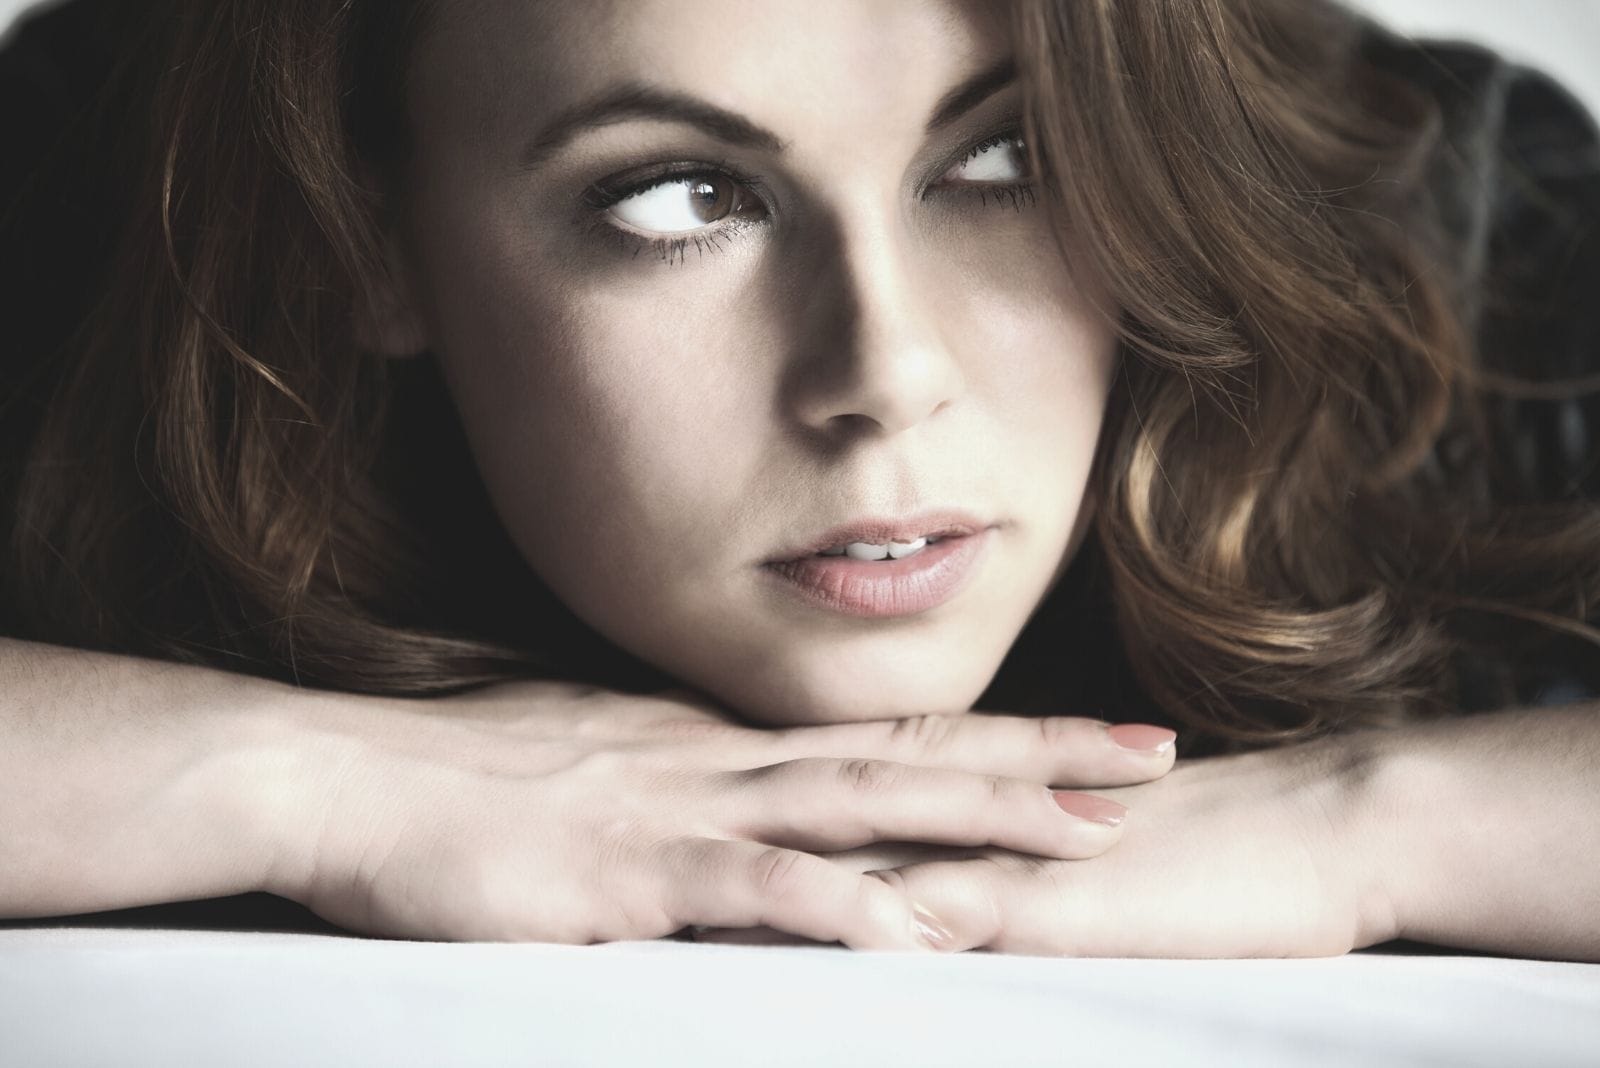 portrait of a young pensive woman in close photography and looking to the side with head leaning over her hands on the table